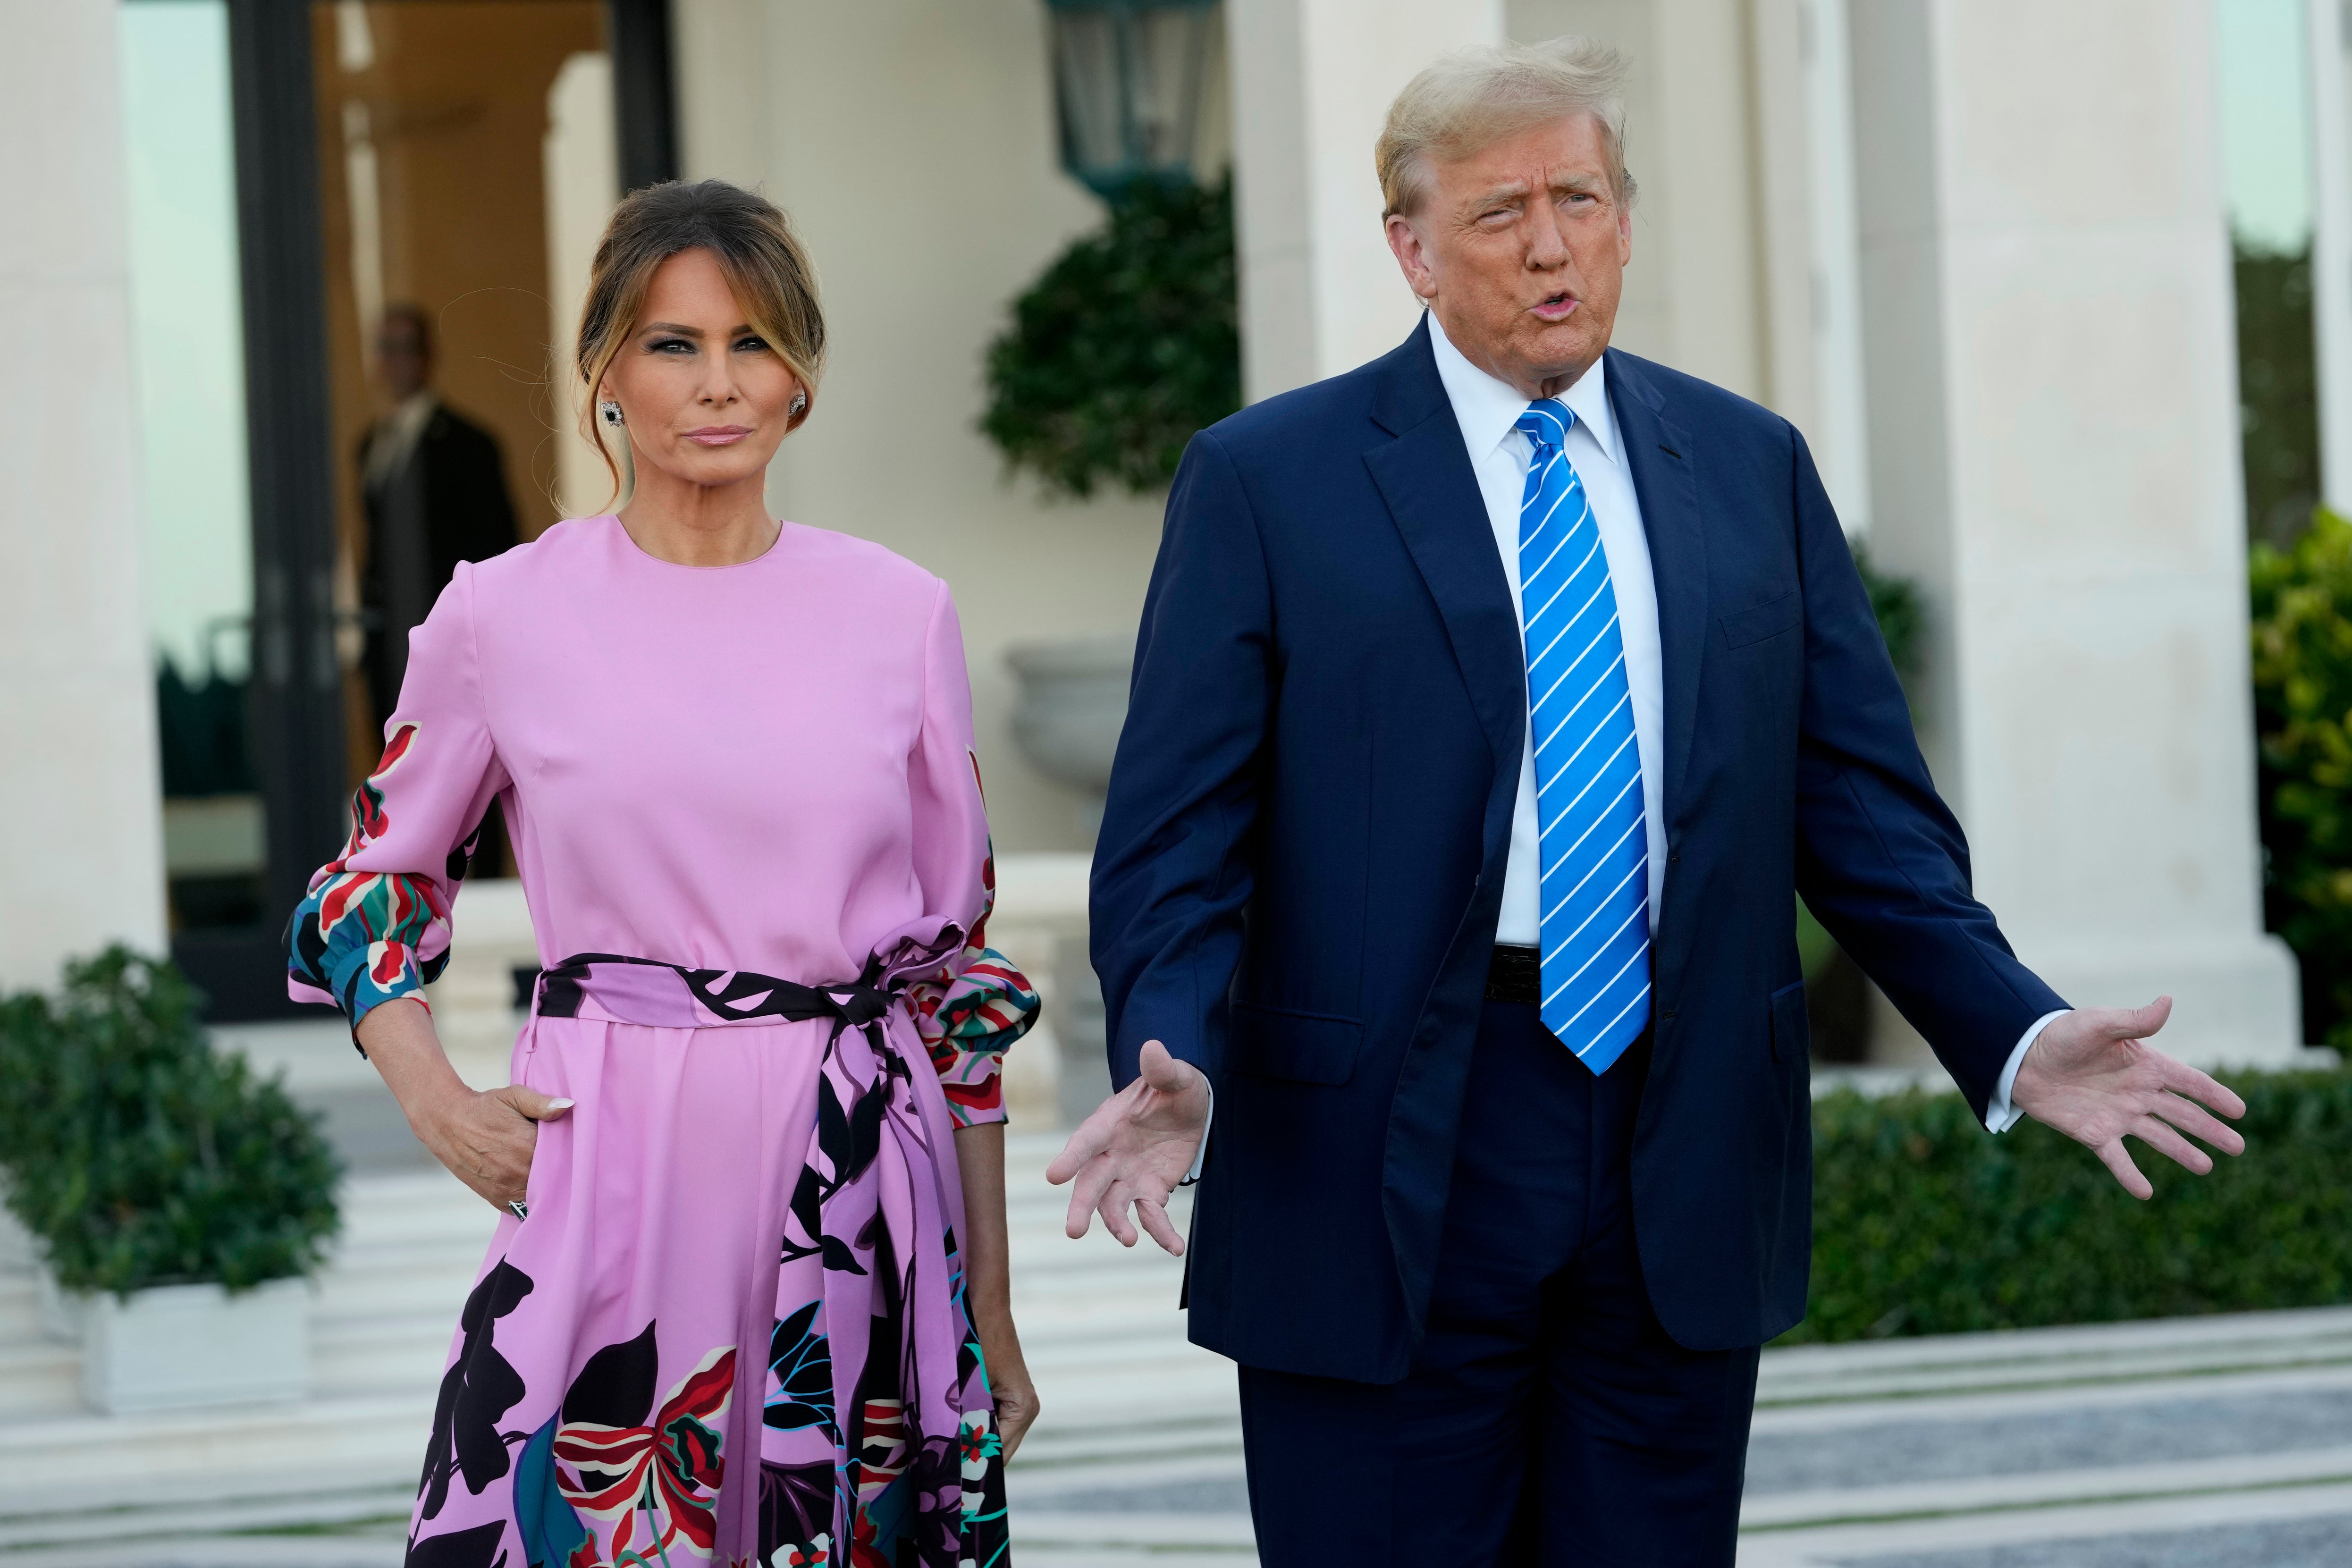 Former President Donald Trump, right, stands with his wife, Melania Trump, as they arrive for a GOP fundraiser on April 6. While they have been pictured together in recent months, Melania has yet to appear at Donald’s hush money trial